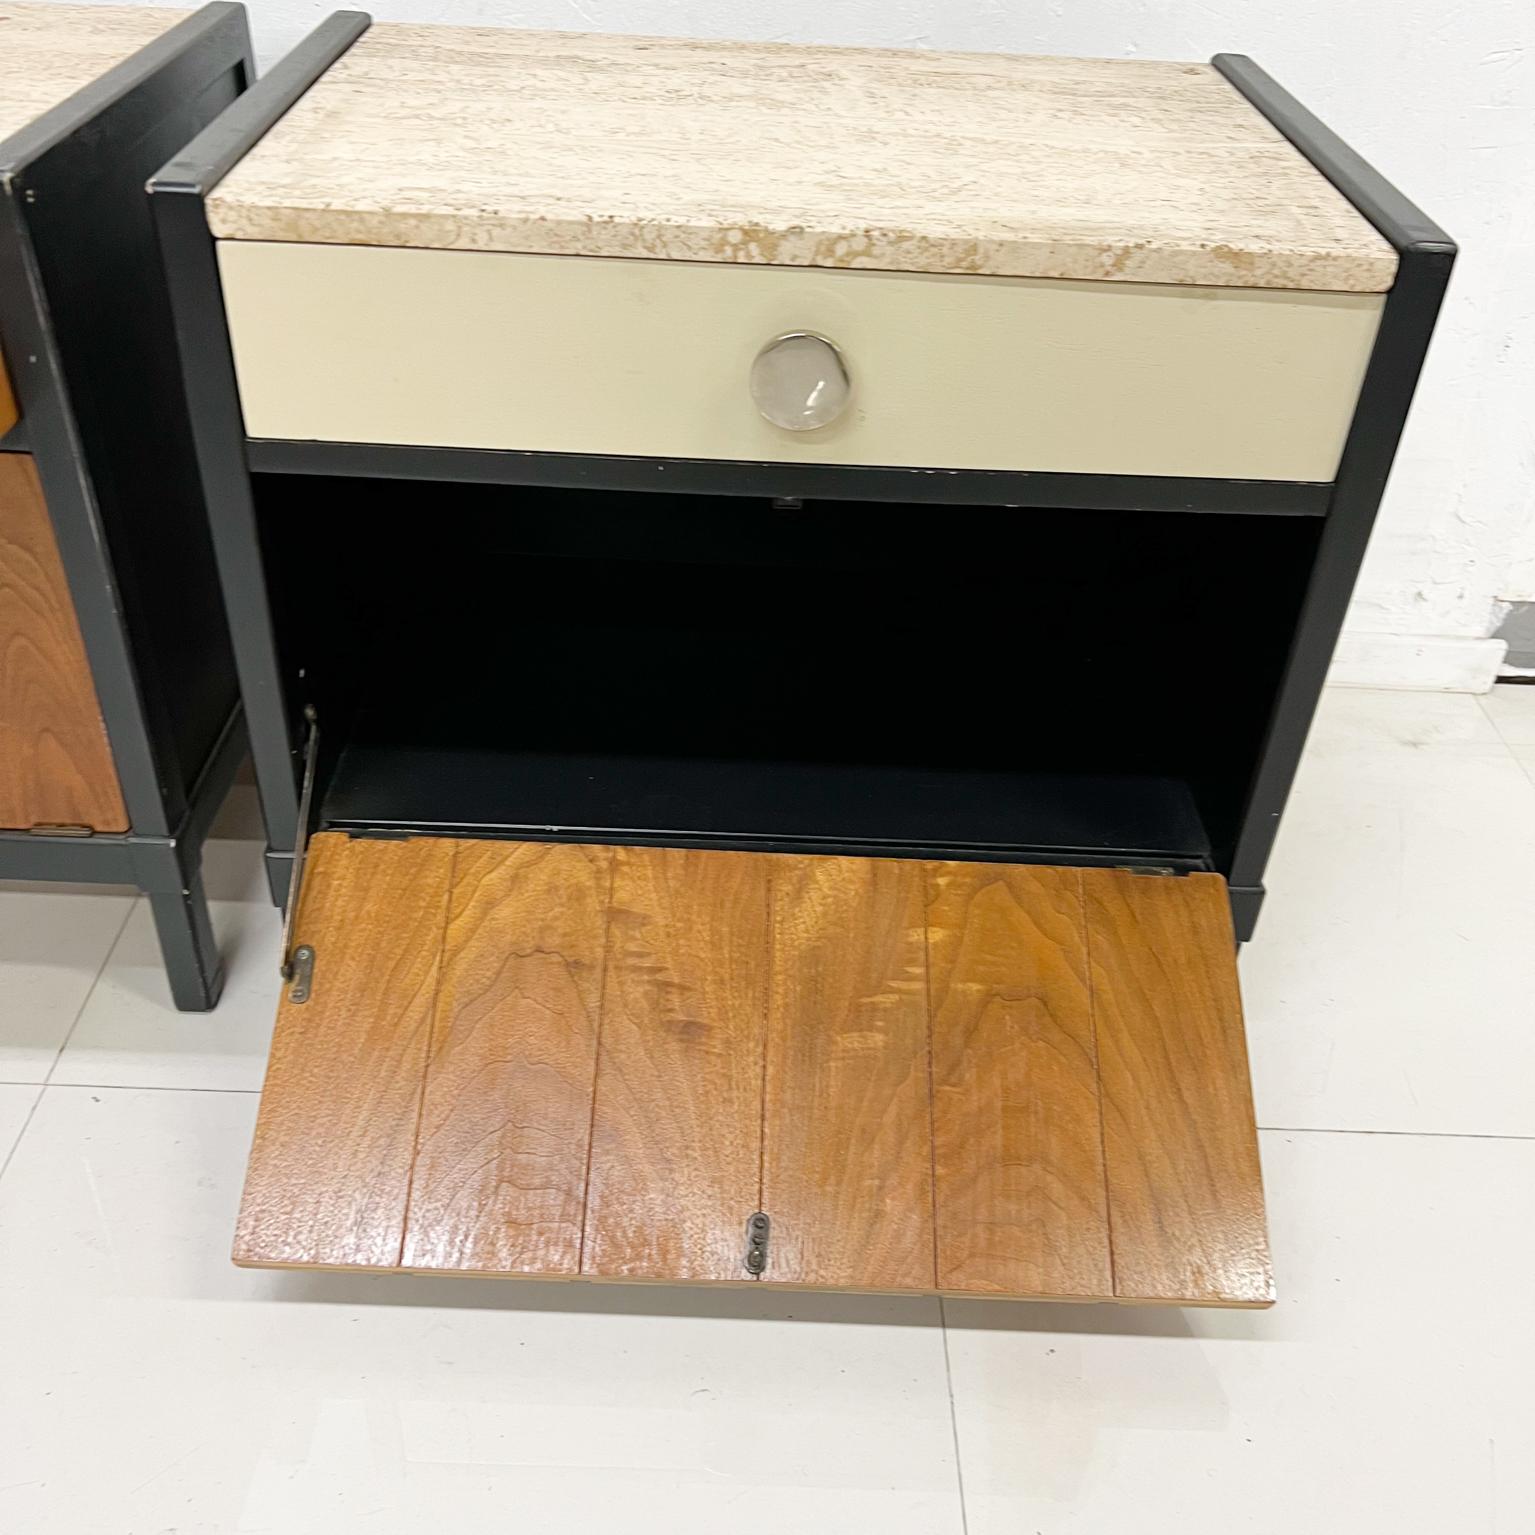 1960s Stylish Drexel Nightstands Two-Tone Travertine Wood Cabinet End Tables 6